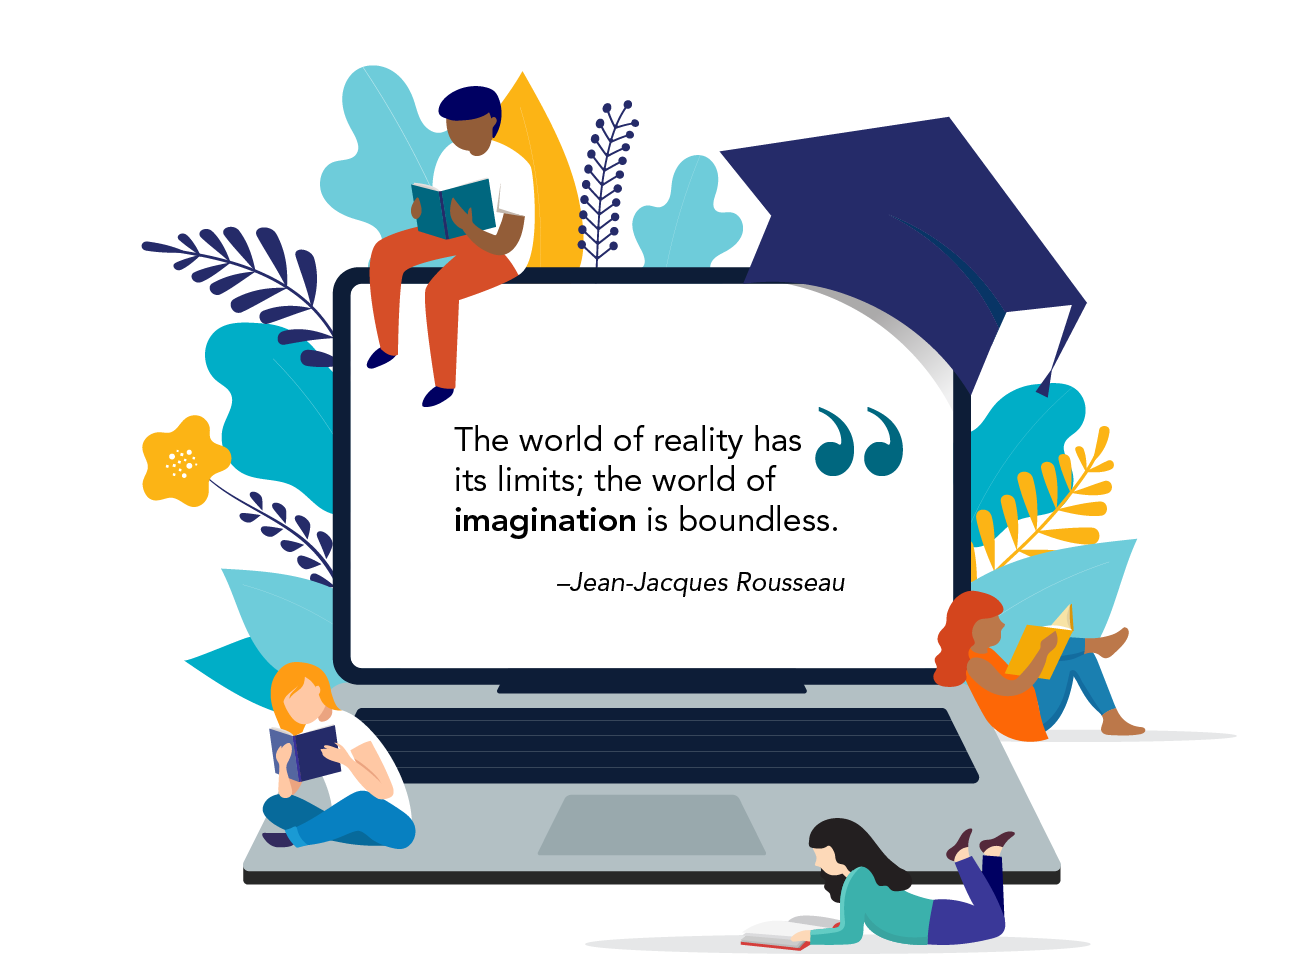 Graphic for wellness Wednesday showing a quote: The world of reality has its limits; the world of imagination is boundless. –Jean-Jacques Rousseau